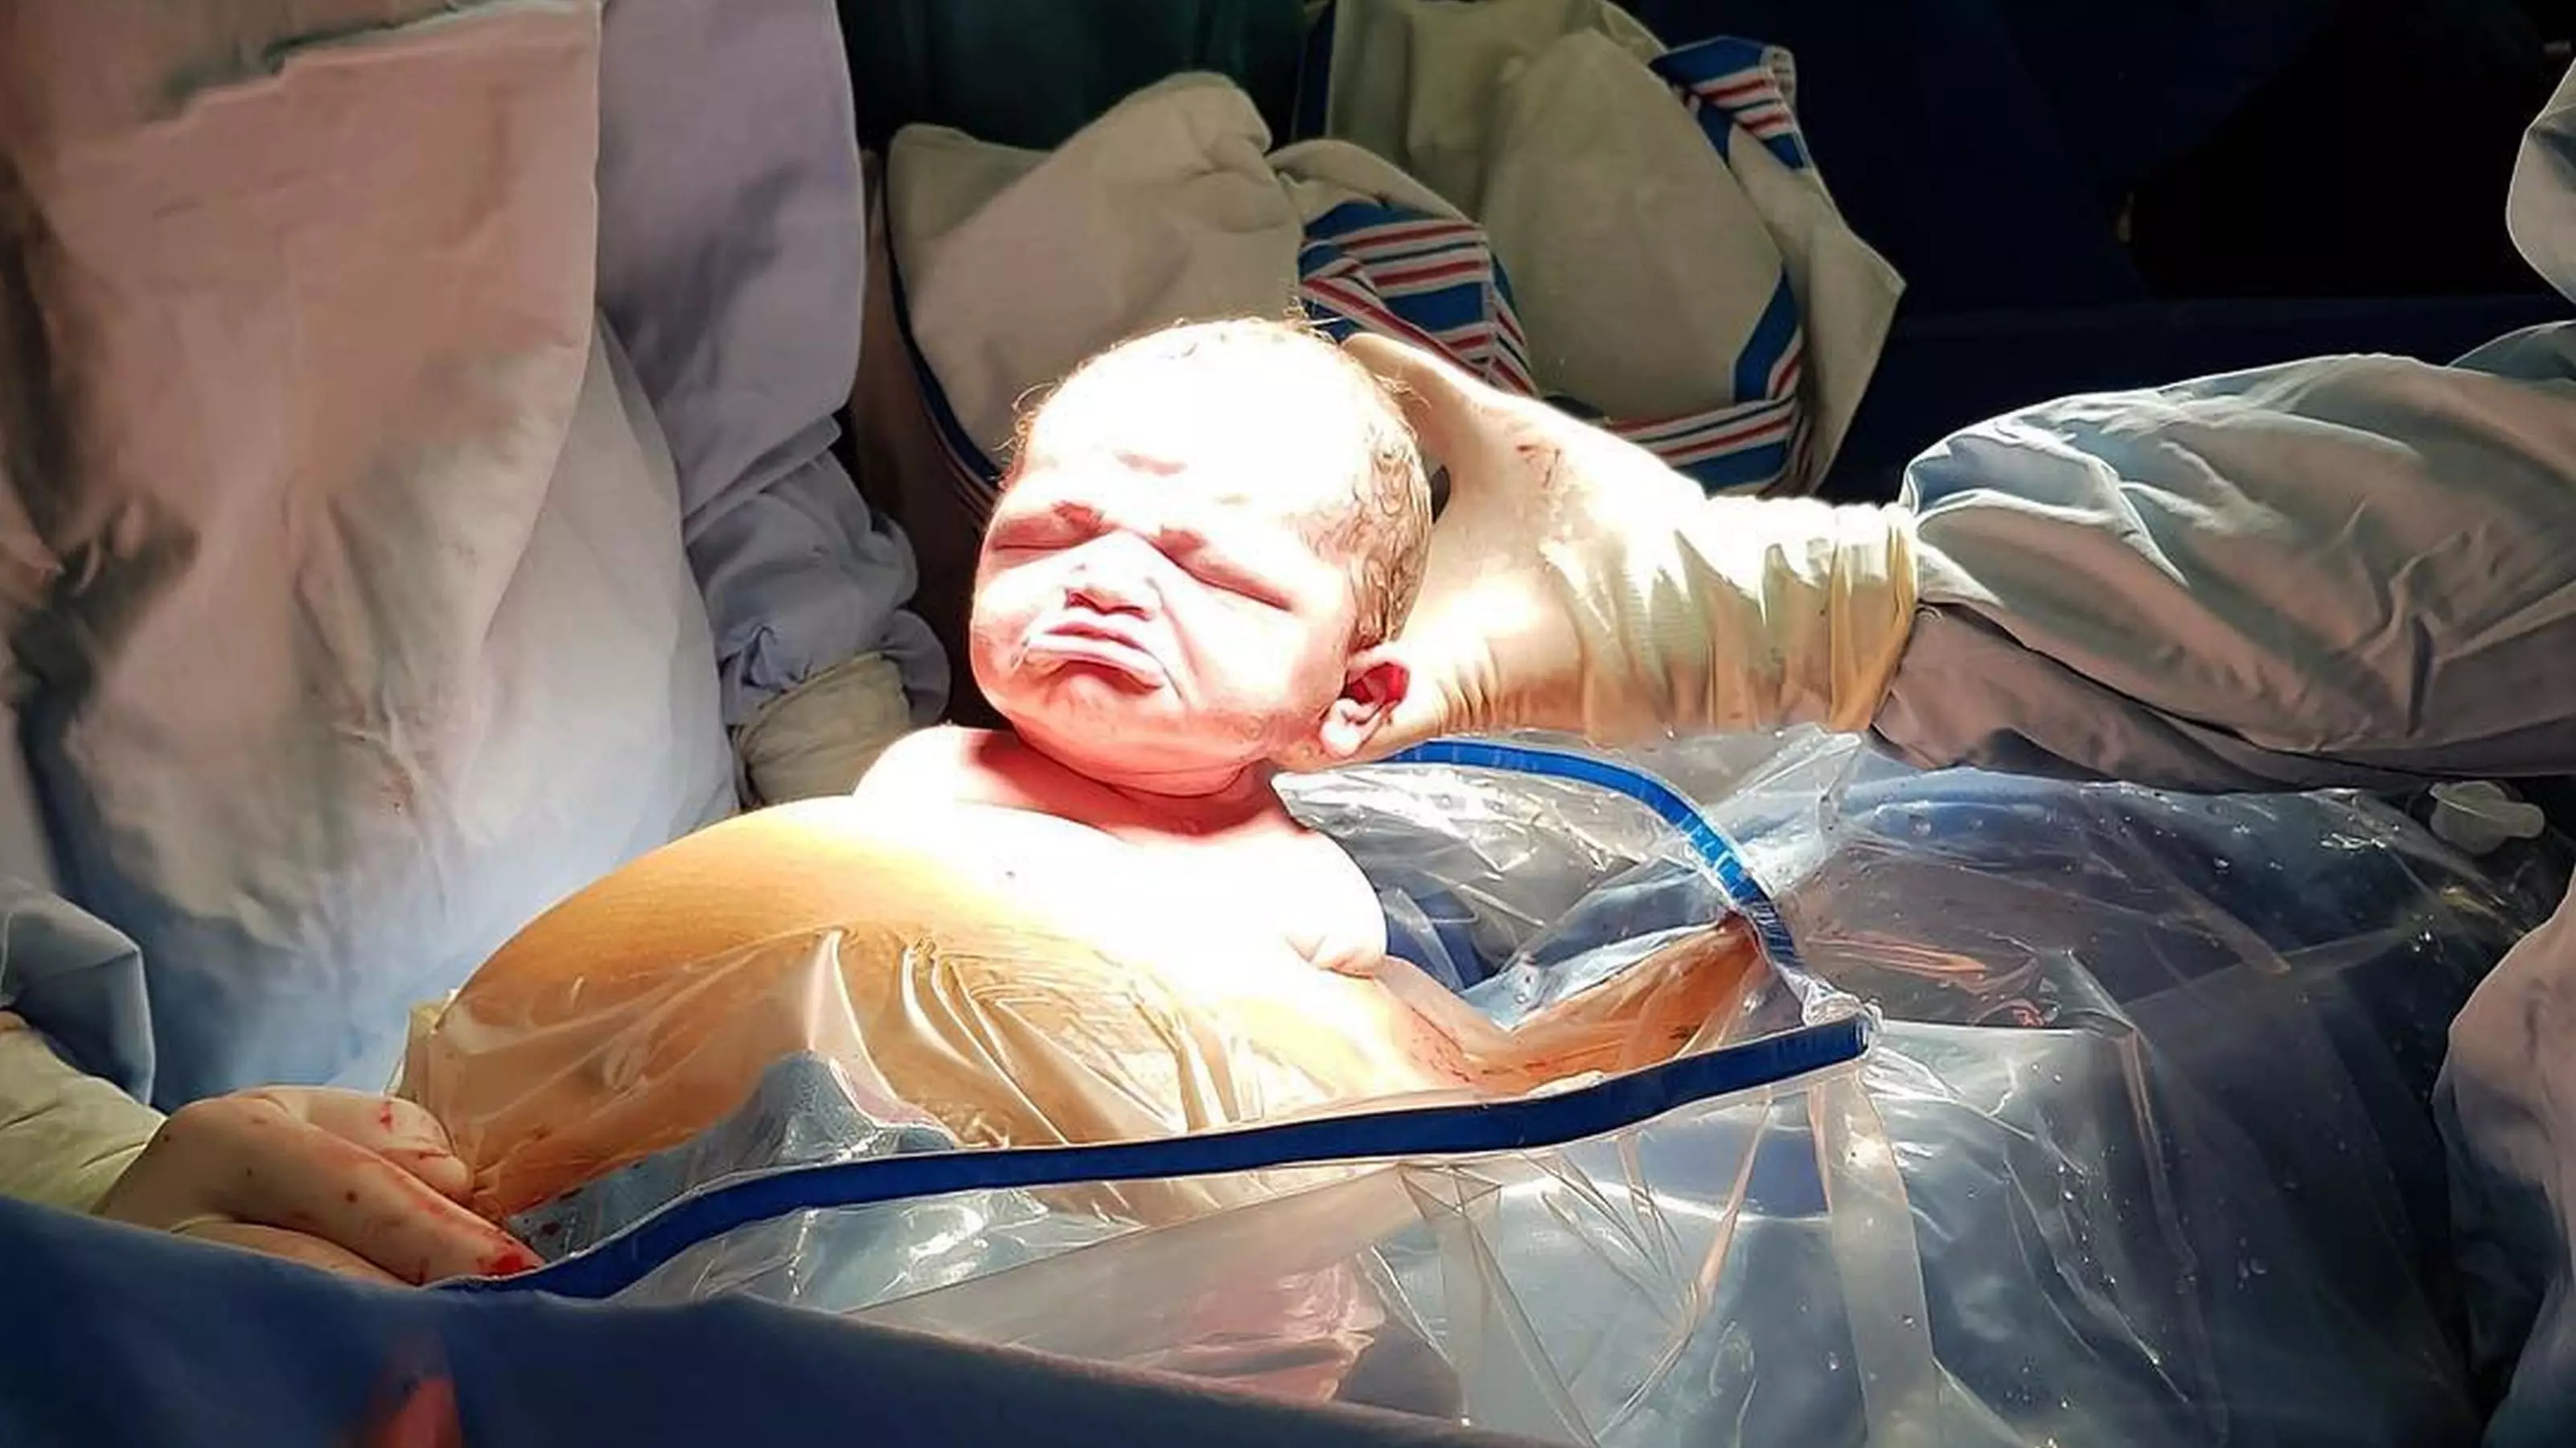 Photo Shows Baby Emerging From The Womb With Hilarious Scowl On Her Face